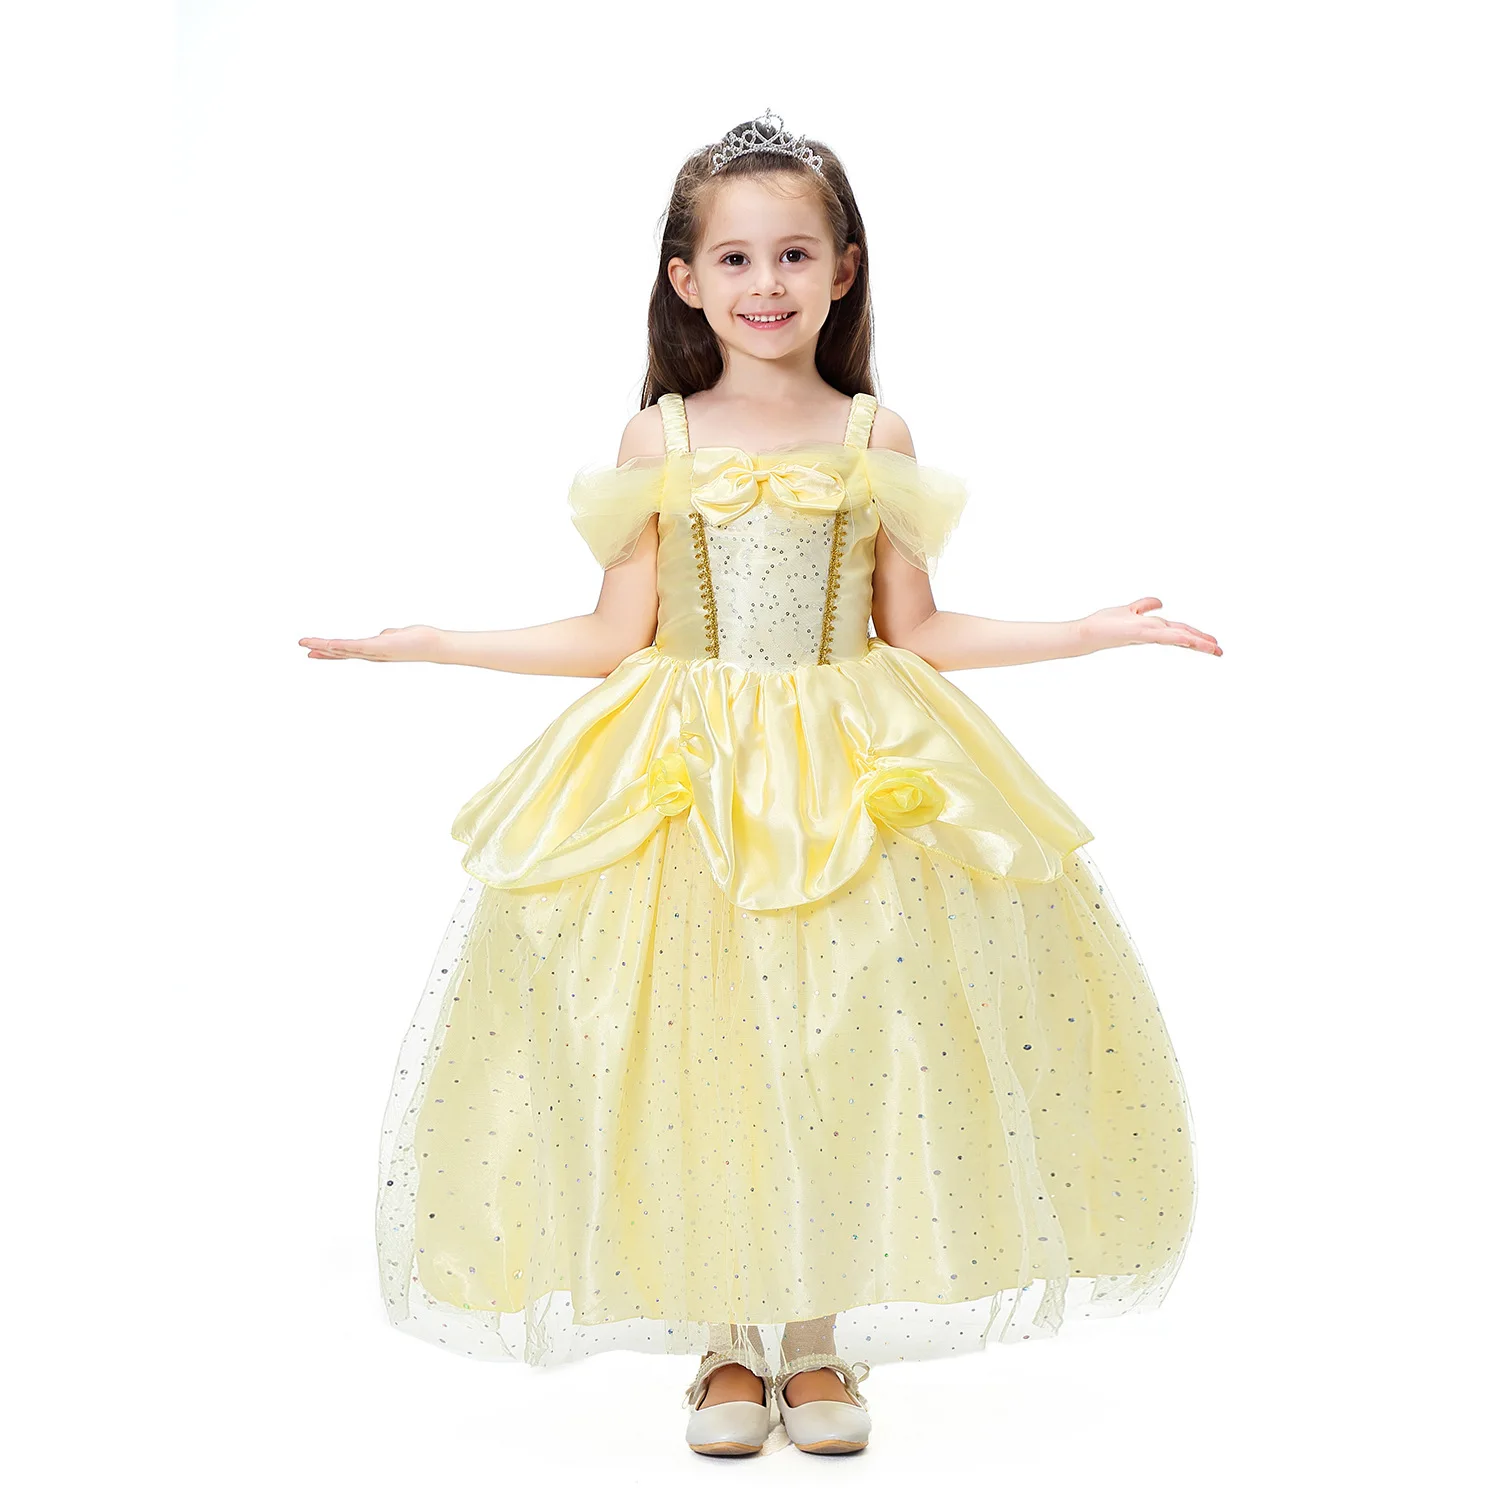 High Quality ! Costumes for Girls Cosplay Belle Princess Dress Girls Dresses for Beauty and the Beast Kids Party Clothing